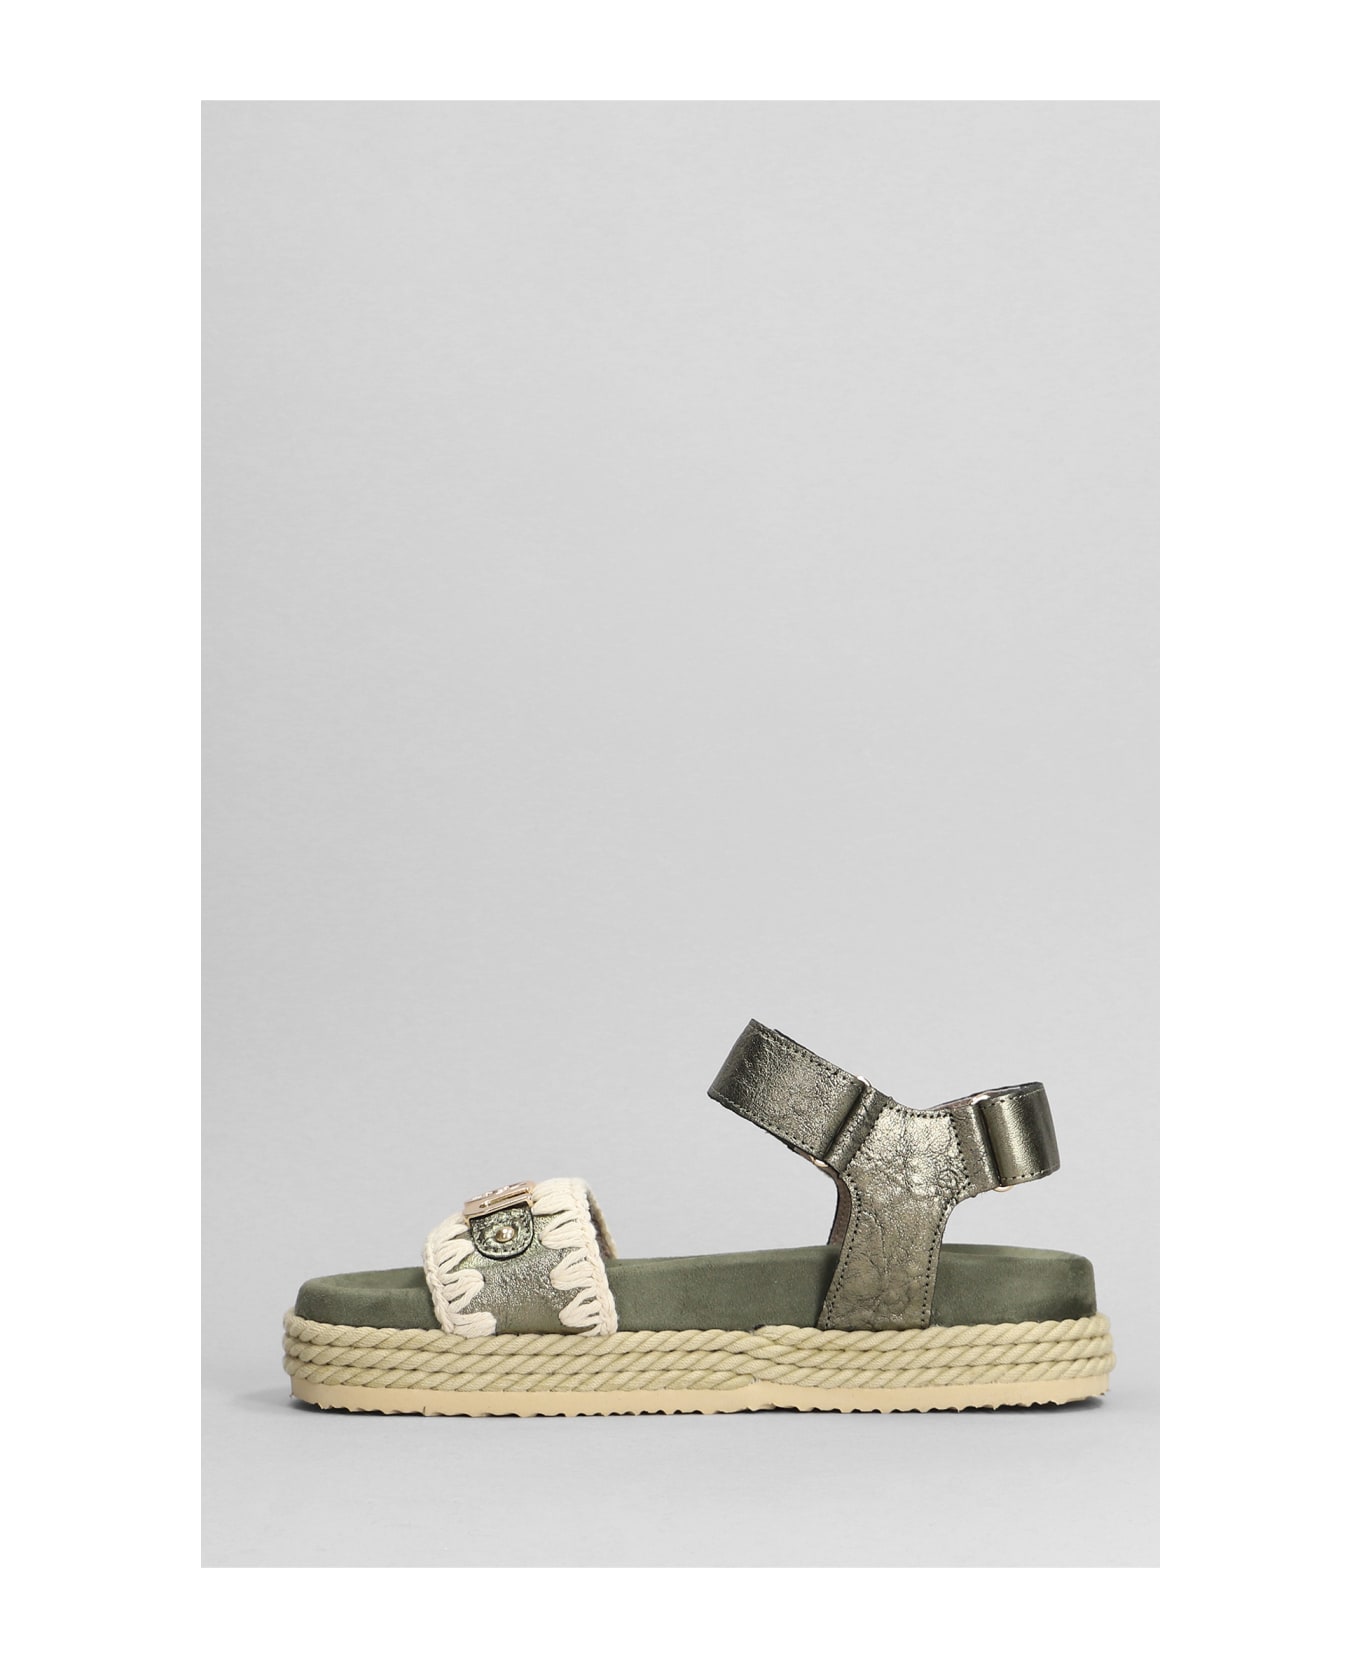 Mou Rope Bio Sandal Flats In Green Suede And Leather - green サンダル